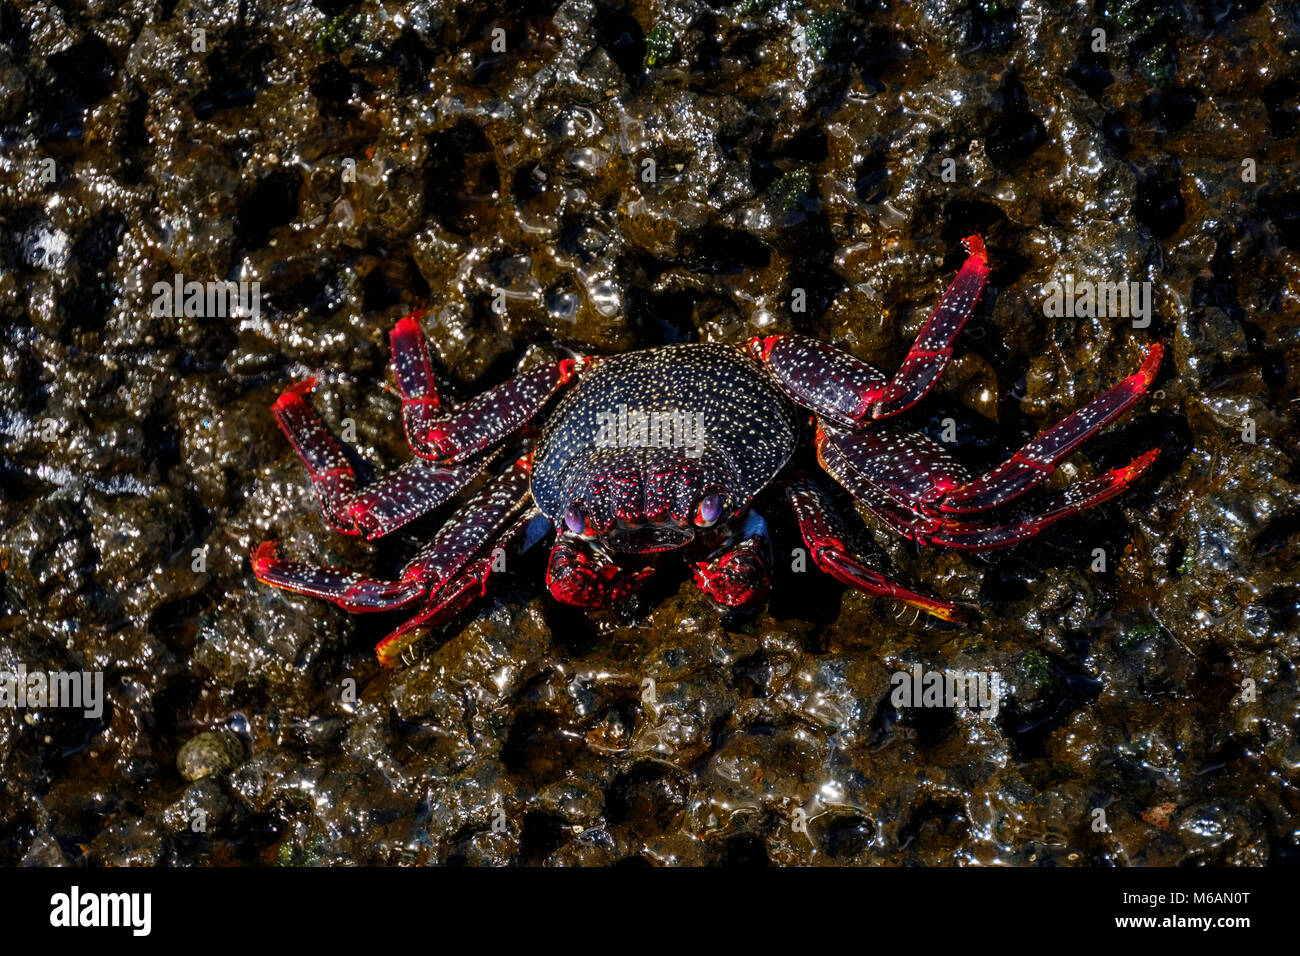 Red rock crab (Grapsus adscensionis) on wet rock, La Gomera, Canary Islands, Spain Stock Photo